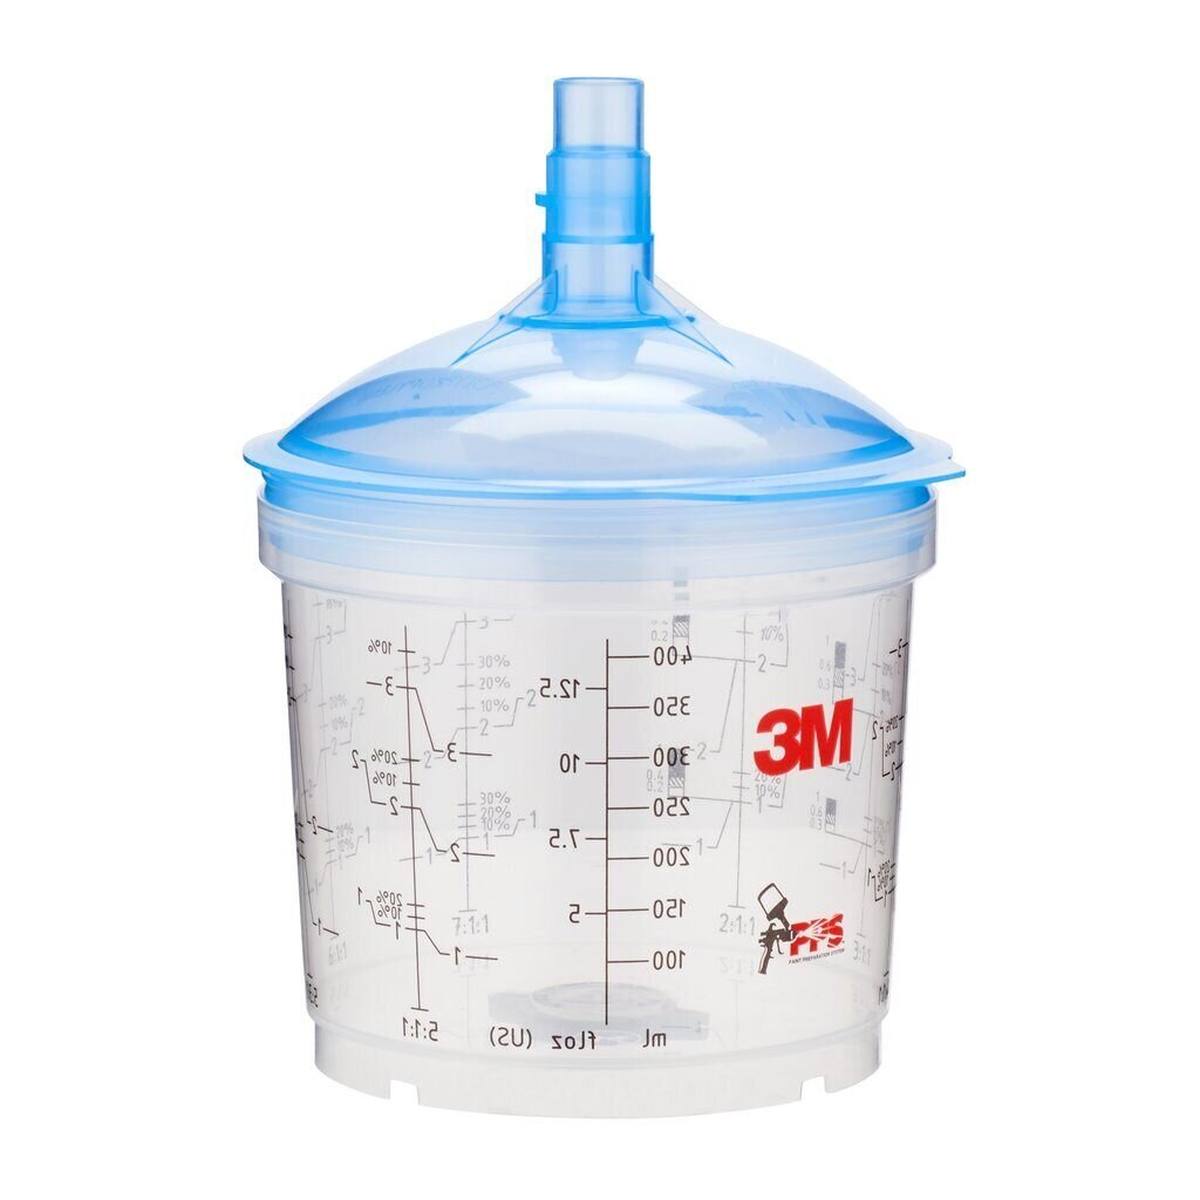 3M PPS Type V lid and cup kits, 0.4l, 125u, 50 cups, 50 lids #16352